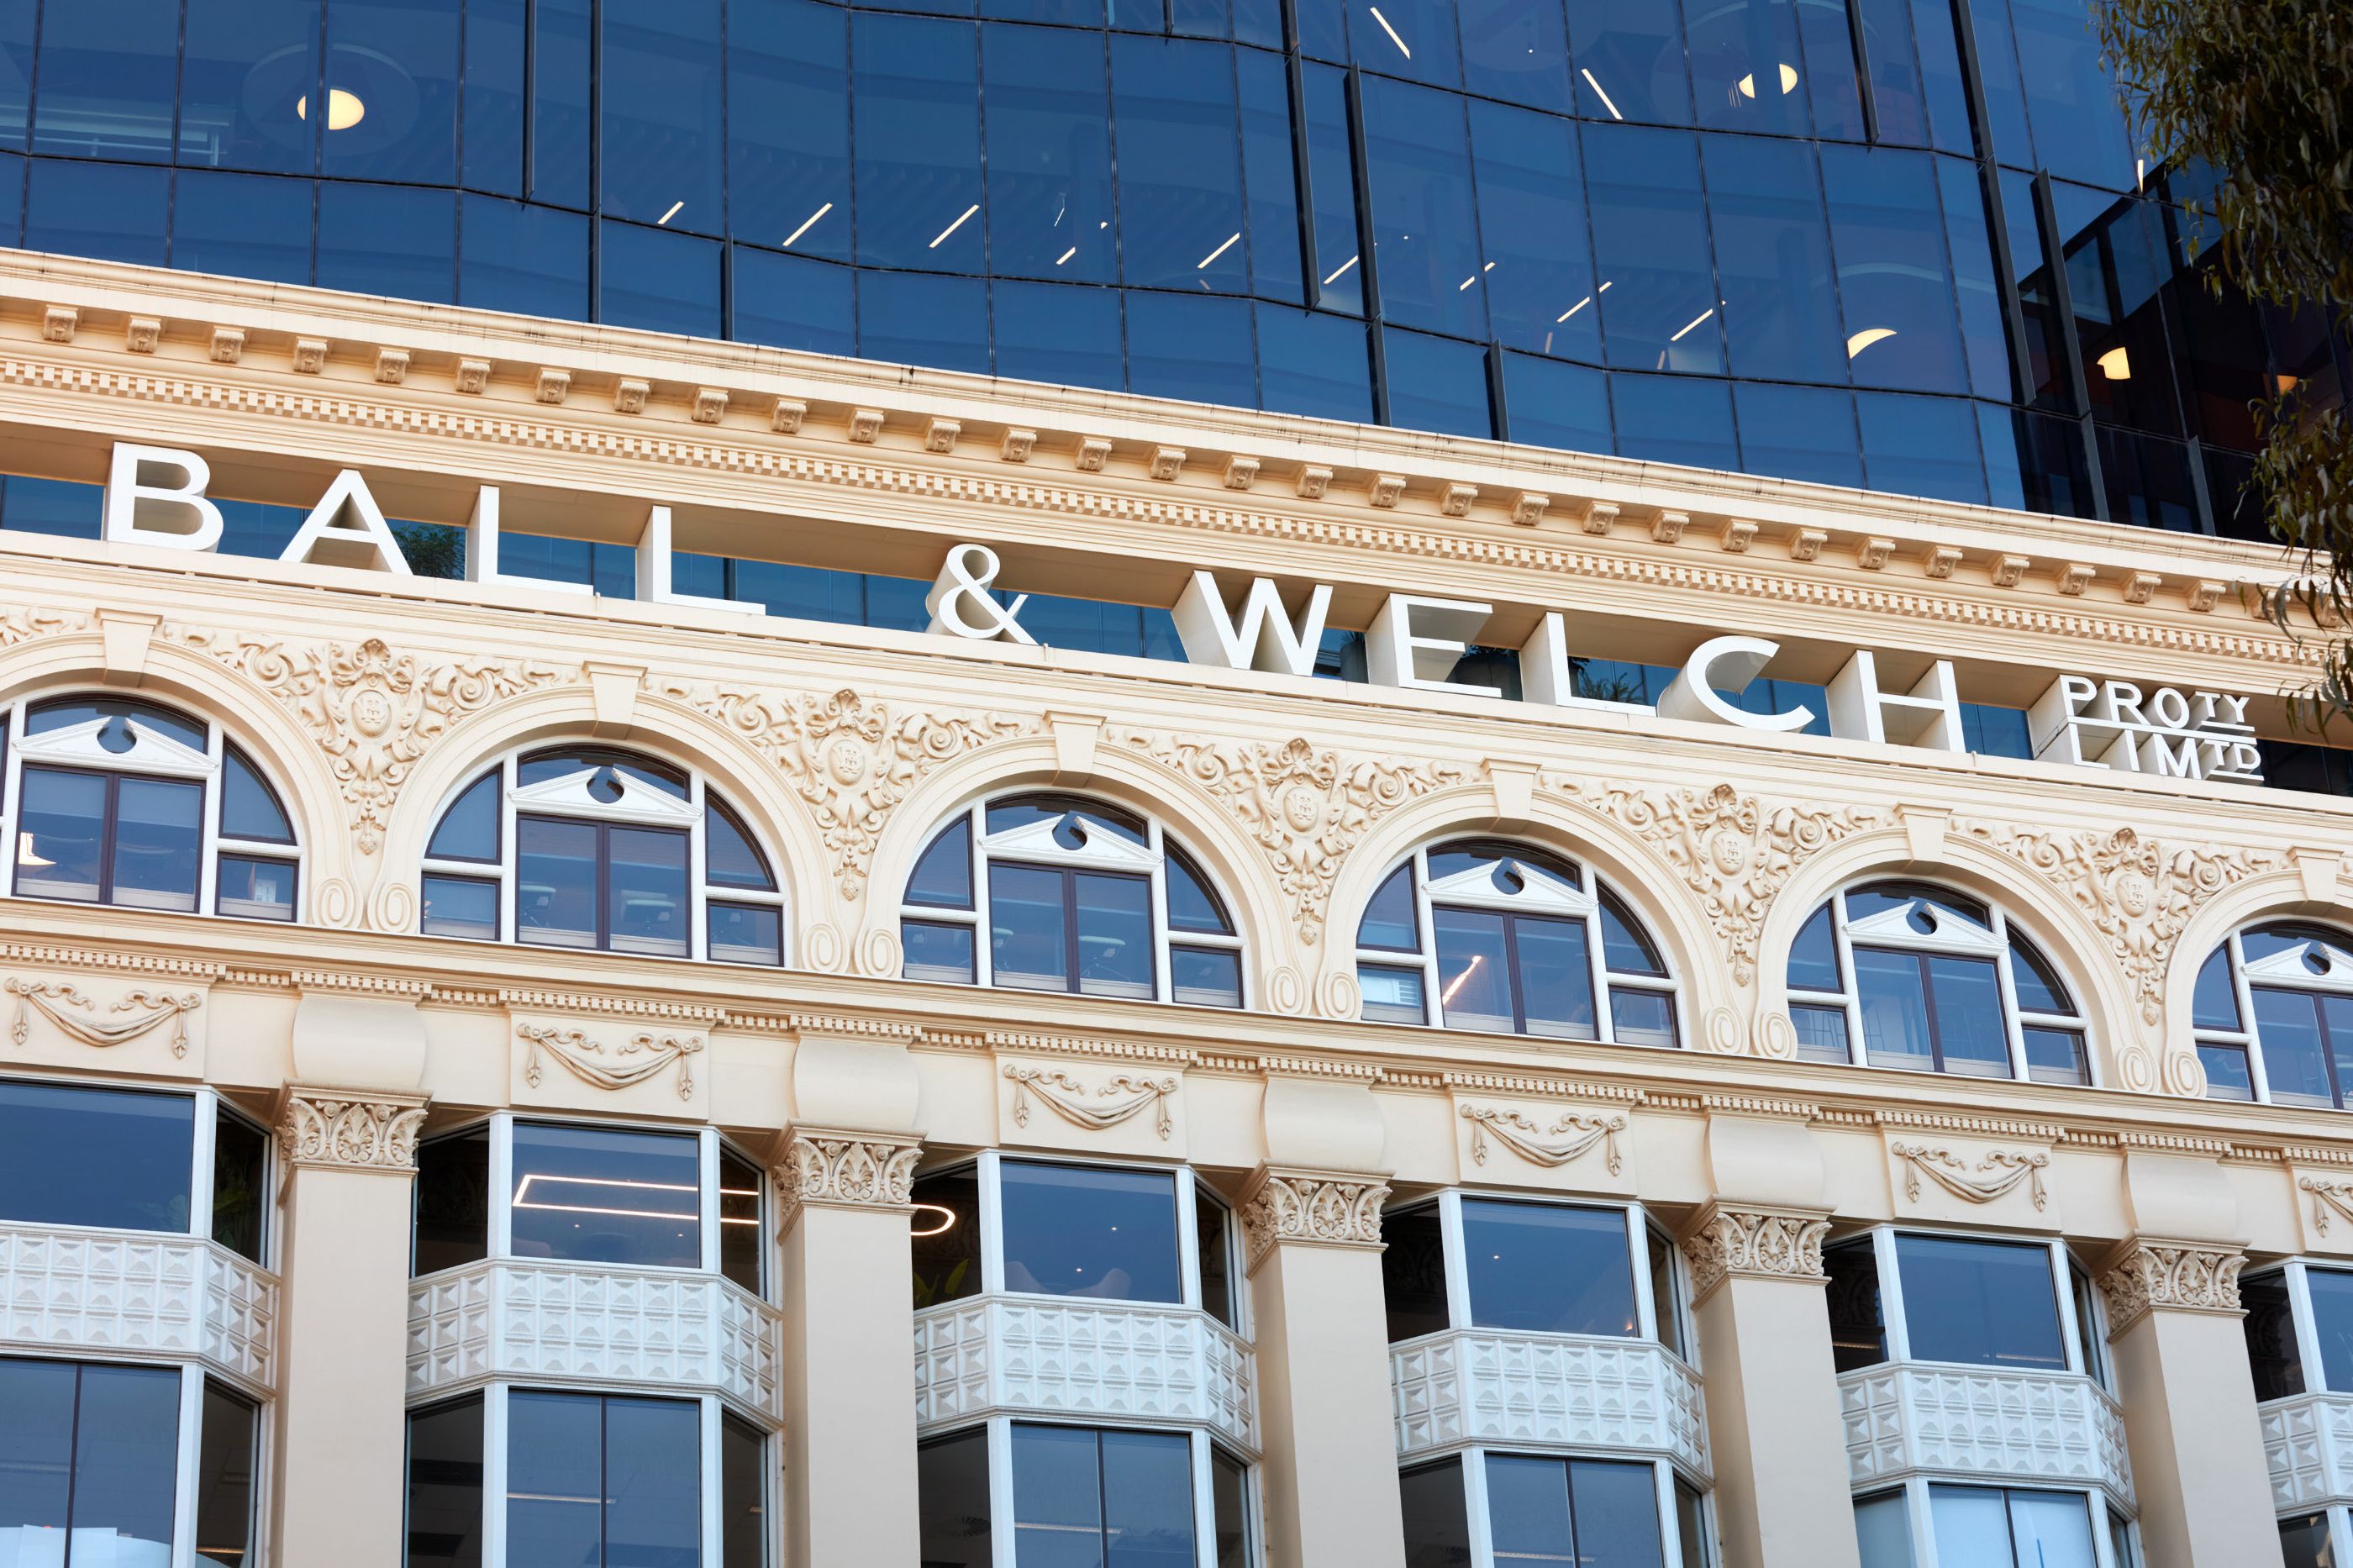 image of Flinders St workplace - Ball & Welch building